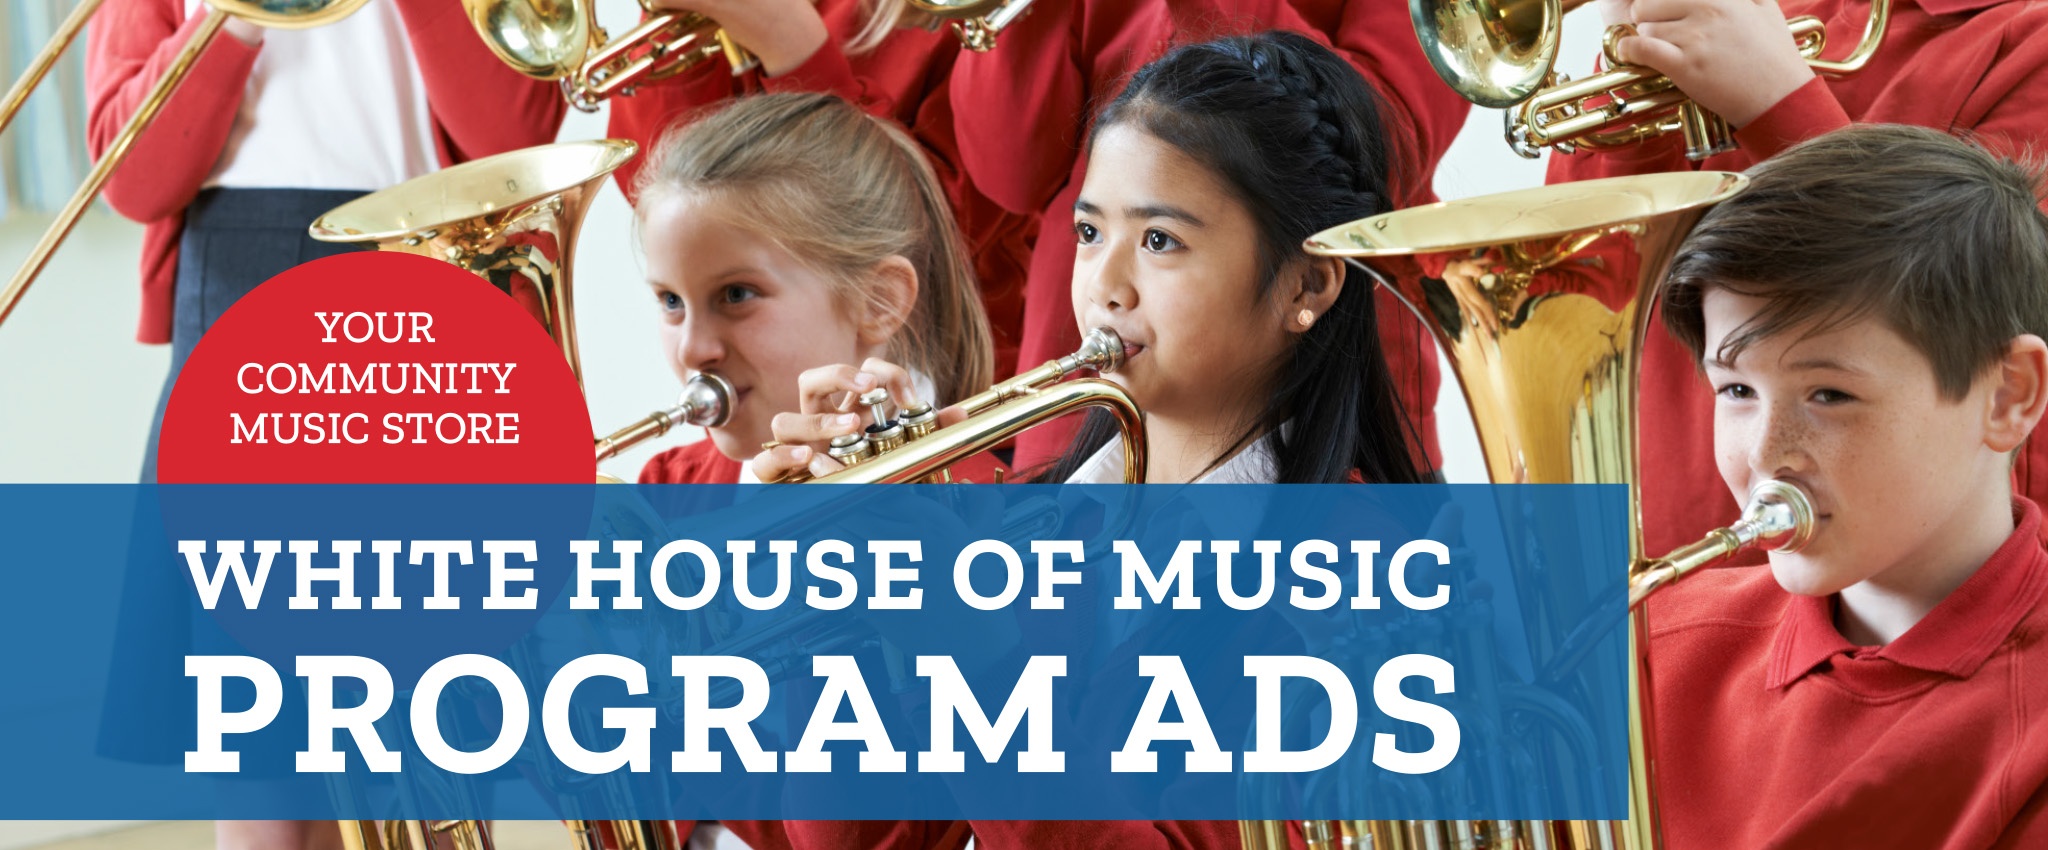 White House of Music Program Ads - Your Community Music Store